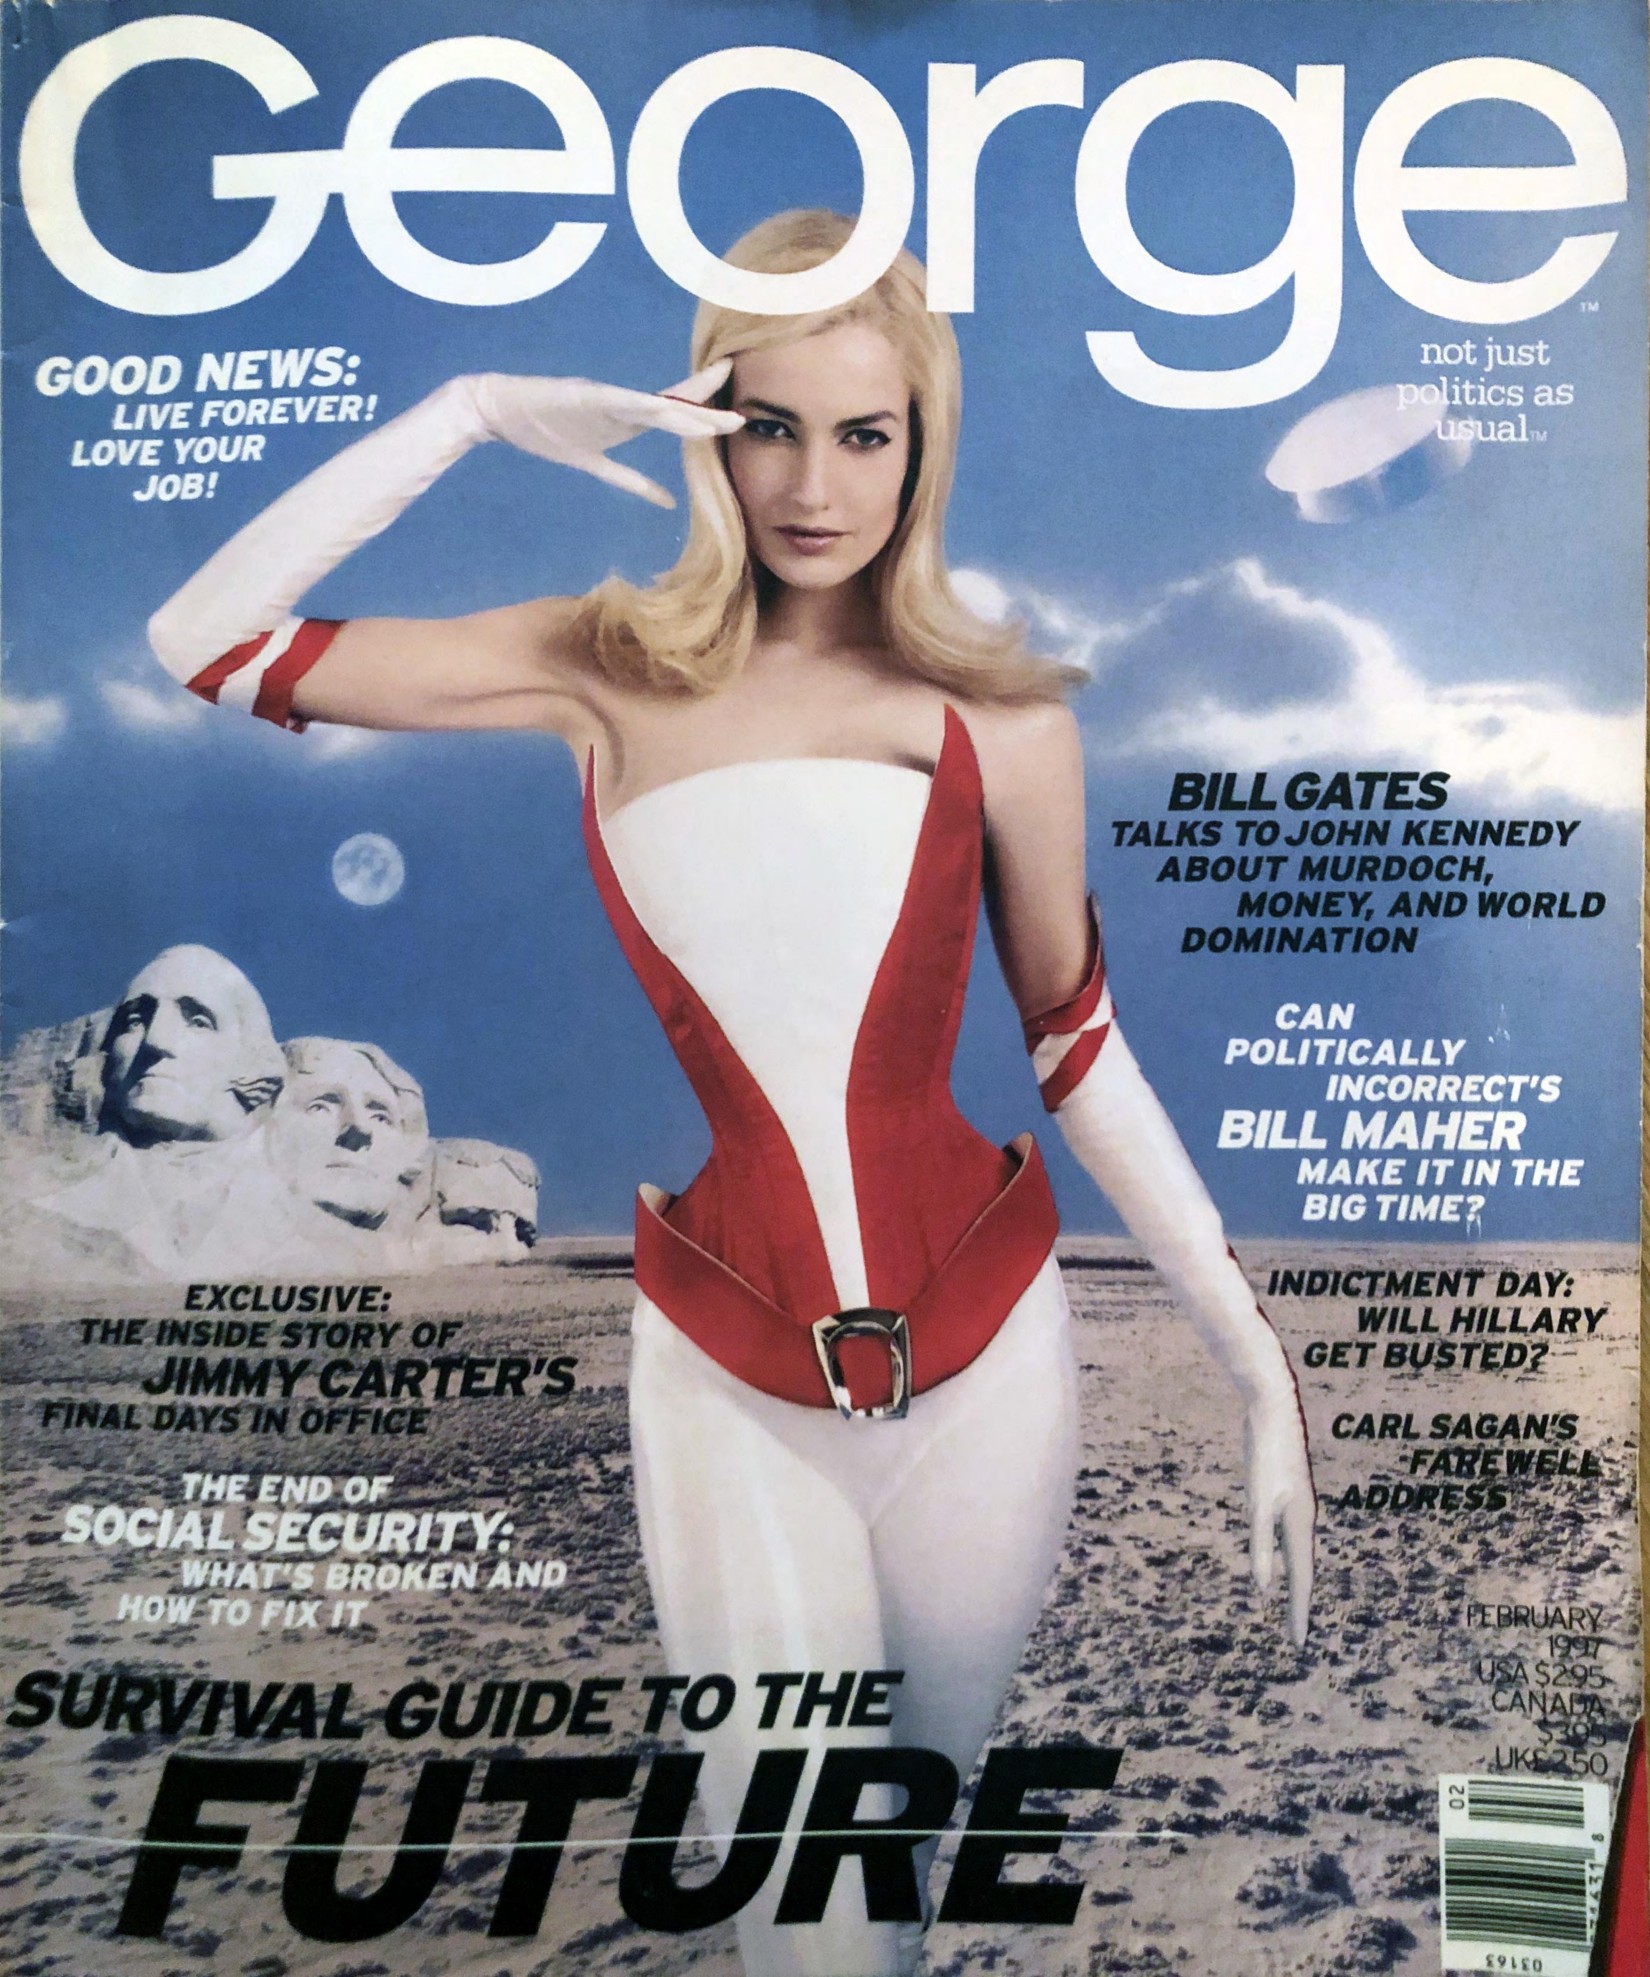 George Magazine - February 1997 Survival Guide to the Future Bill Gates Interview